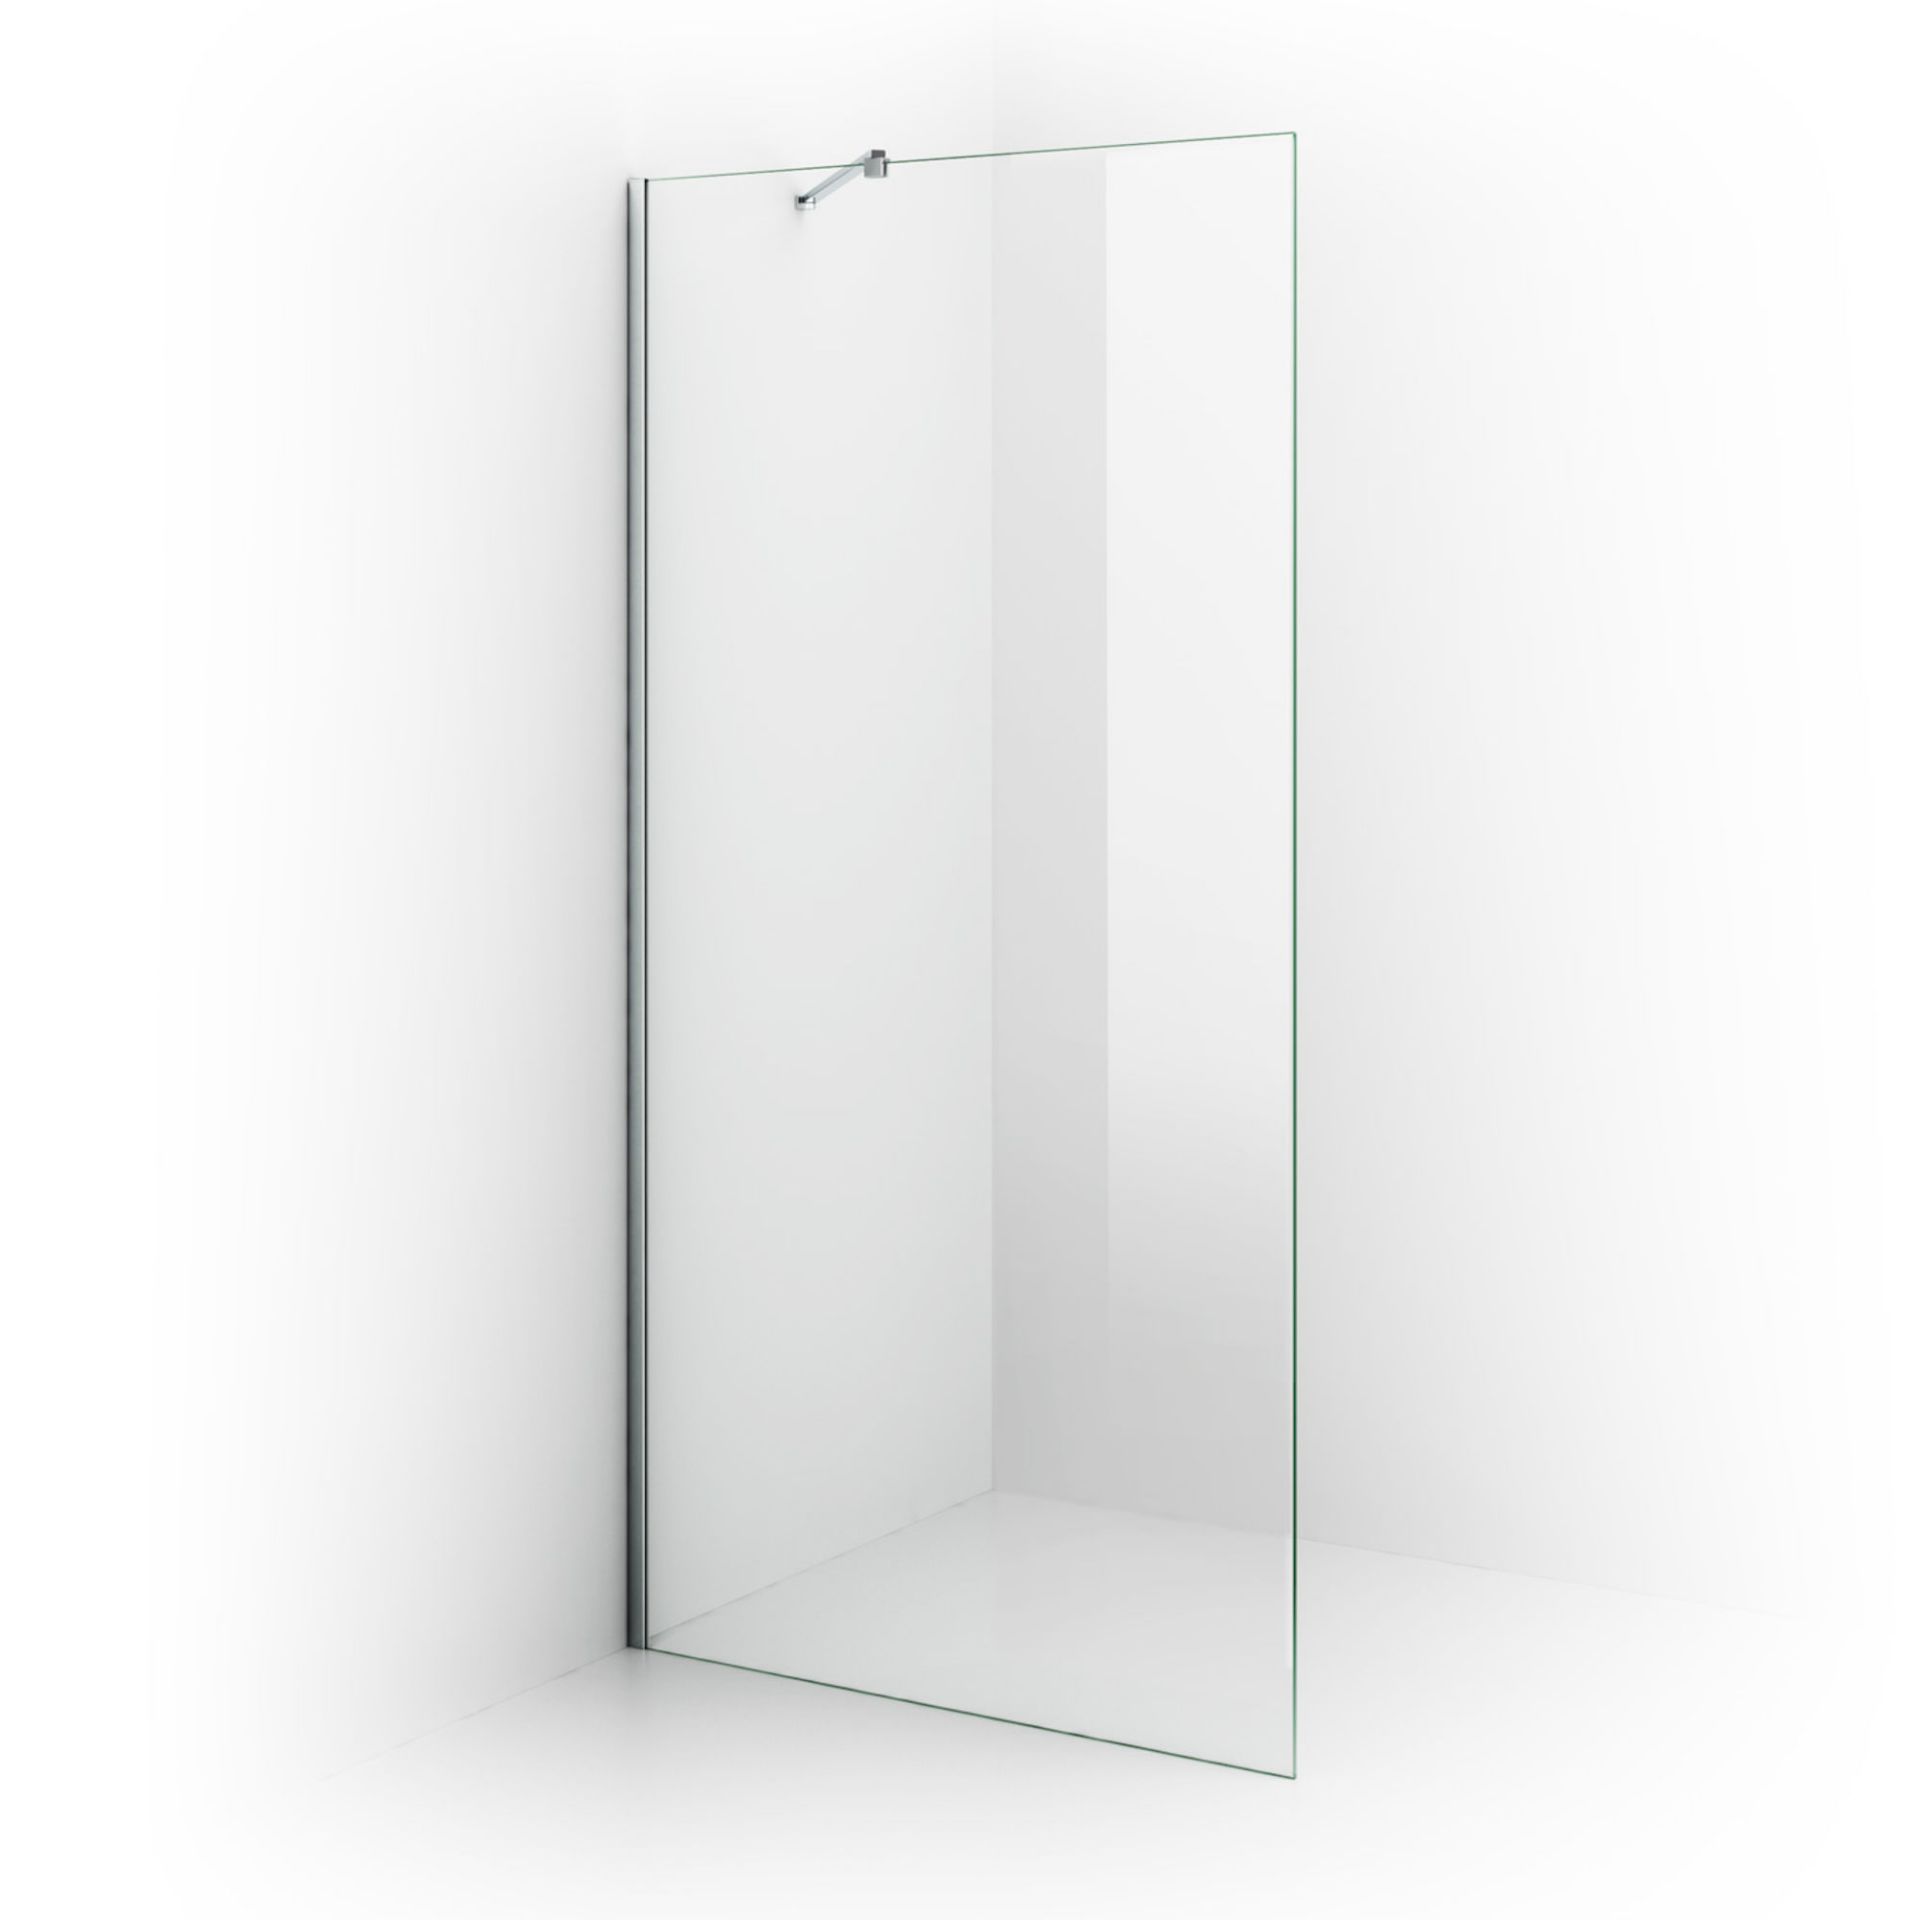 (JM172) 1000mm - 8mm - Premium EasyClean Wetroom Panel. RRP £399.99. 8mm EasyClean glass - Our glass - Image 3 of 4